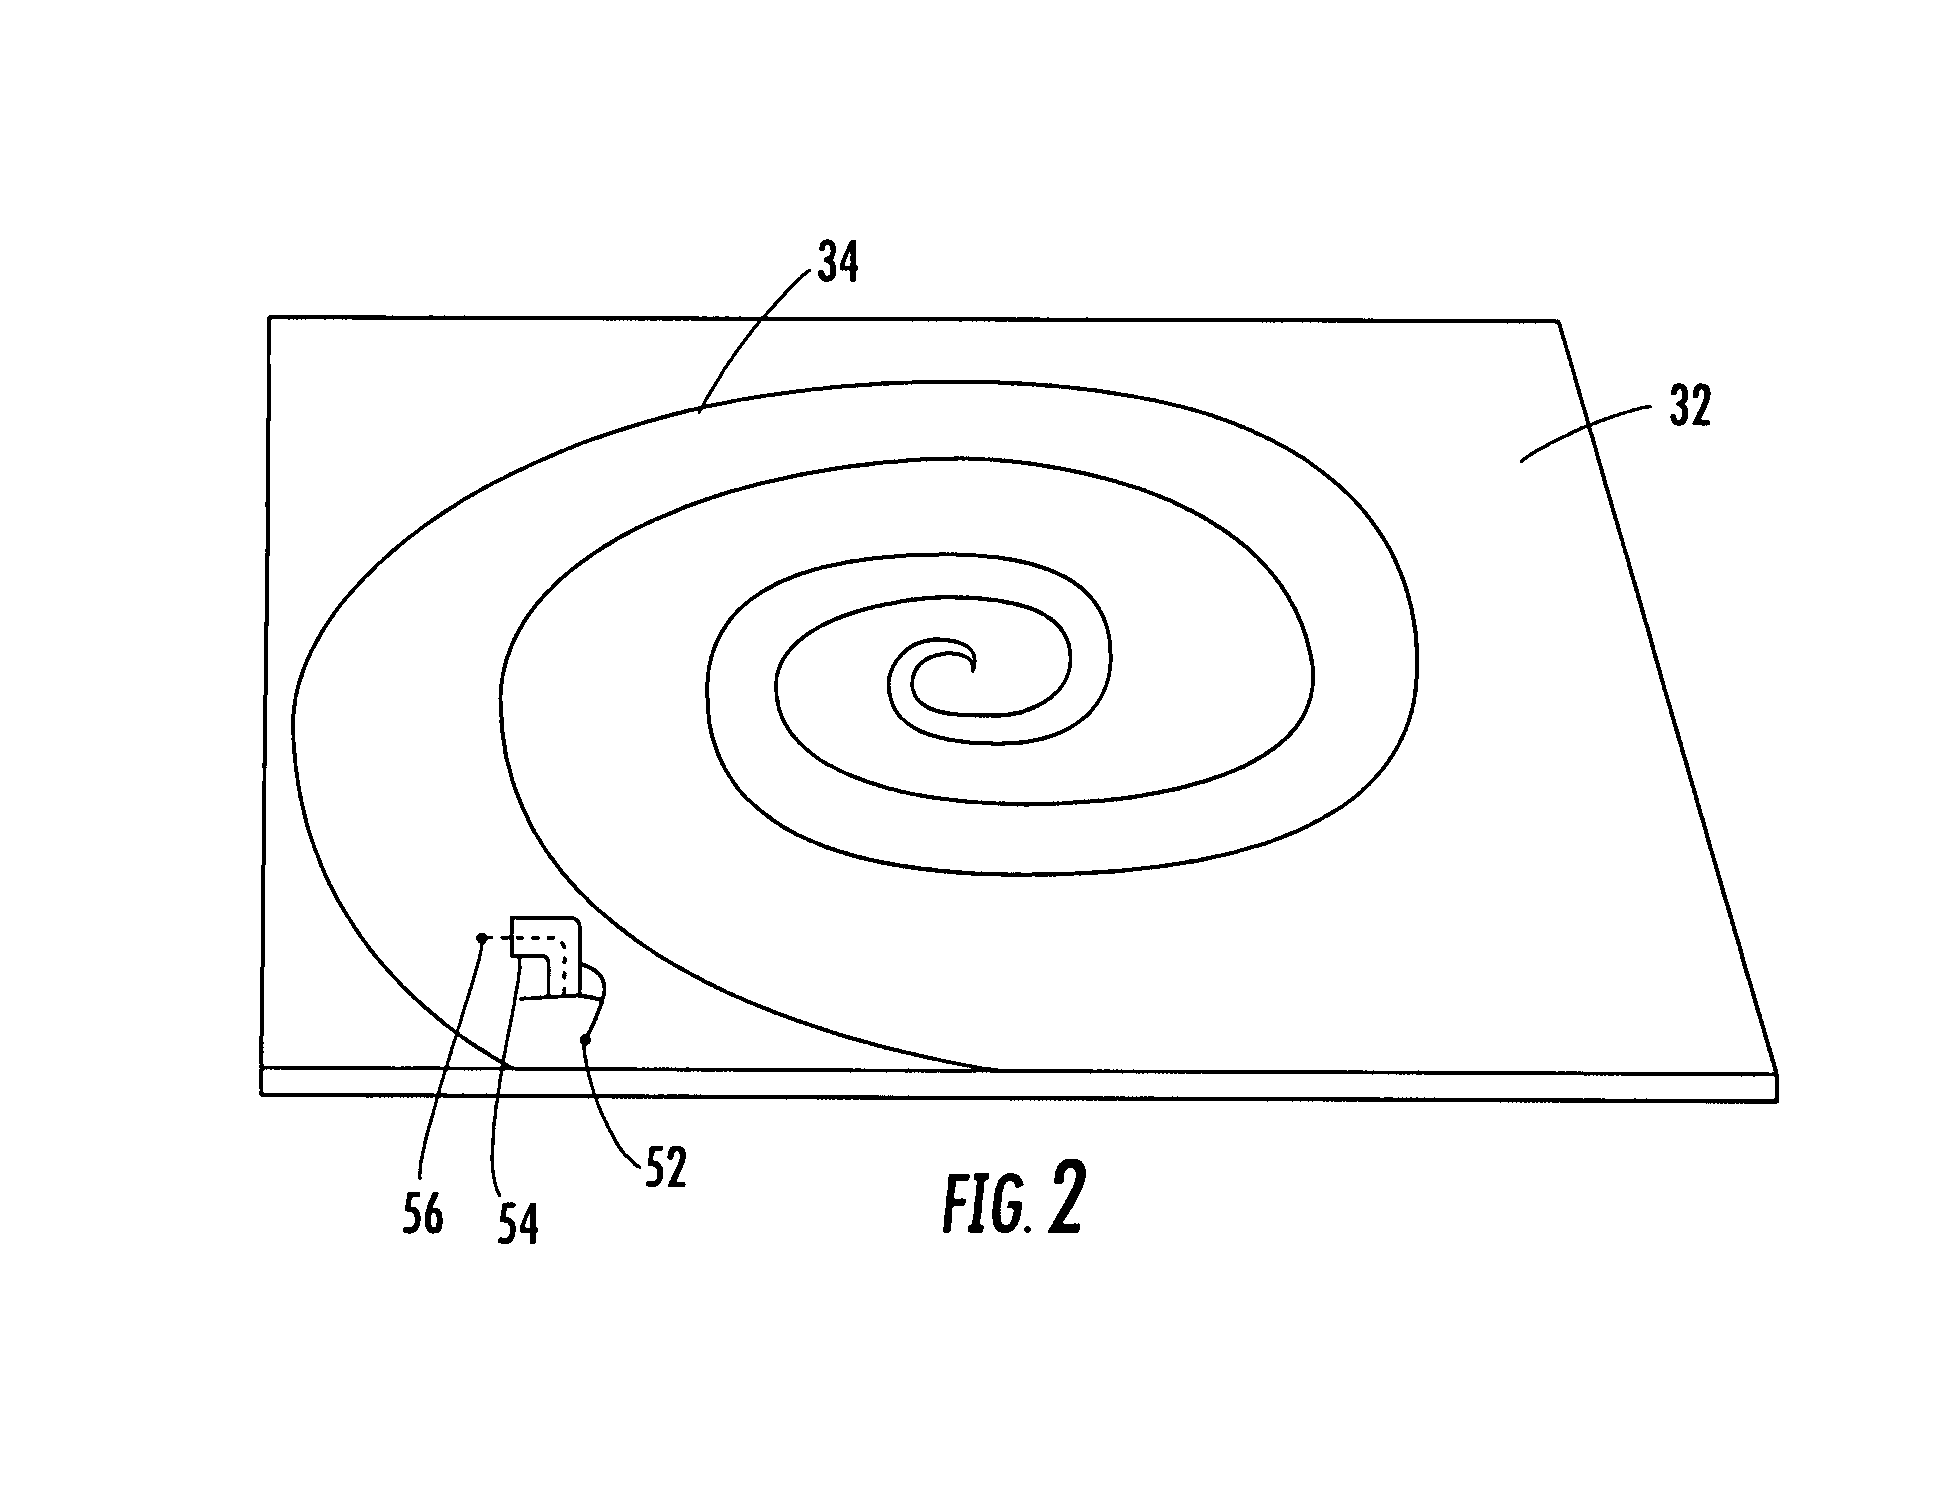 Hybrid antenna including spiral antenna and periodic array, and associated methods